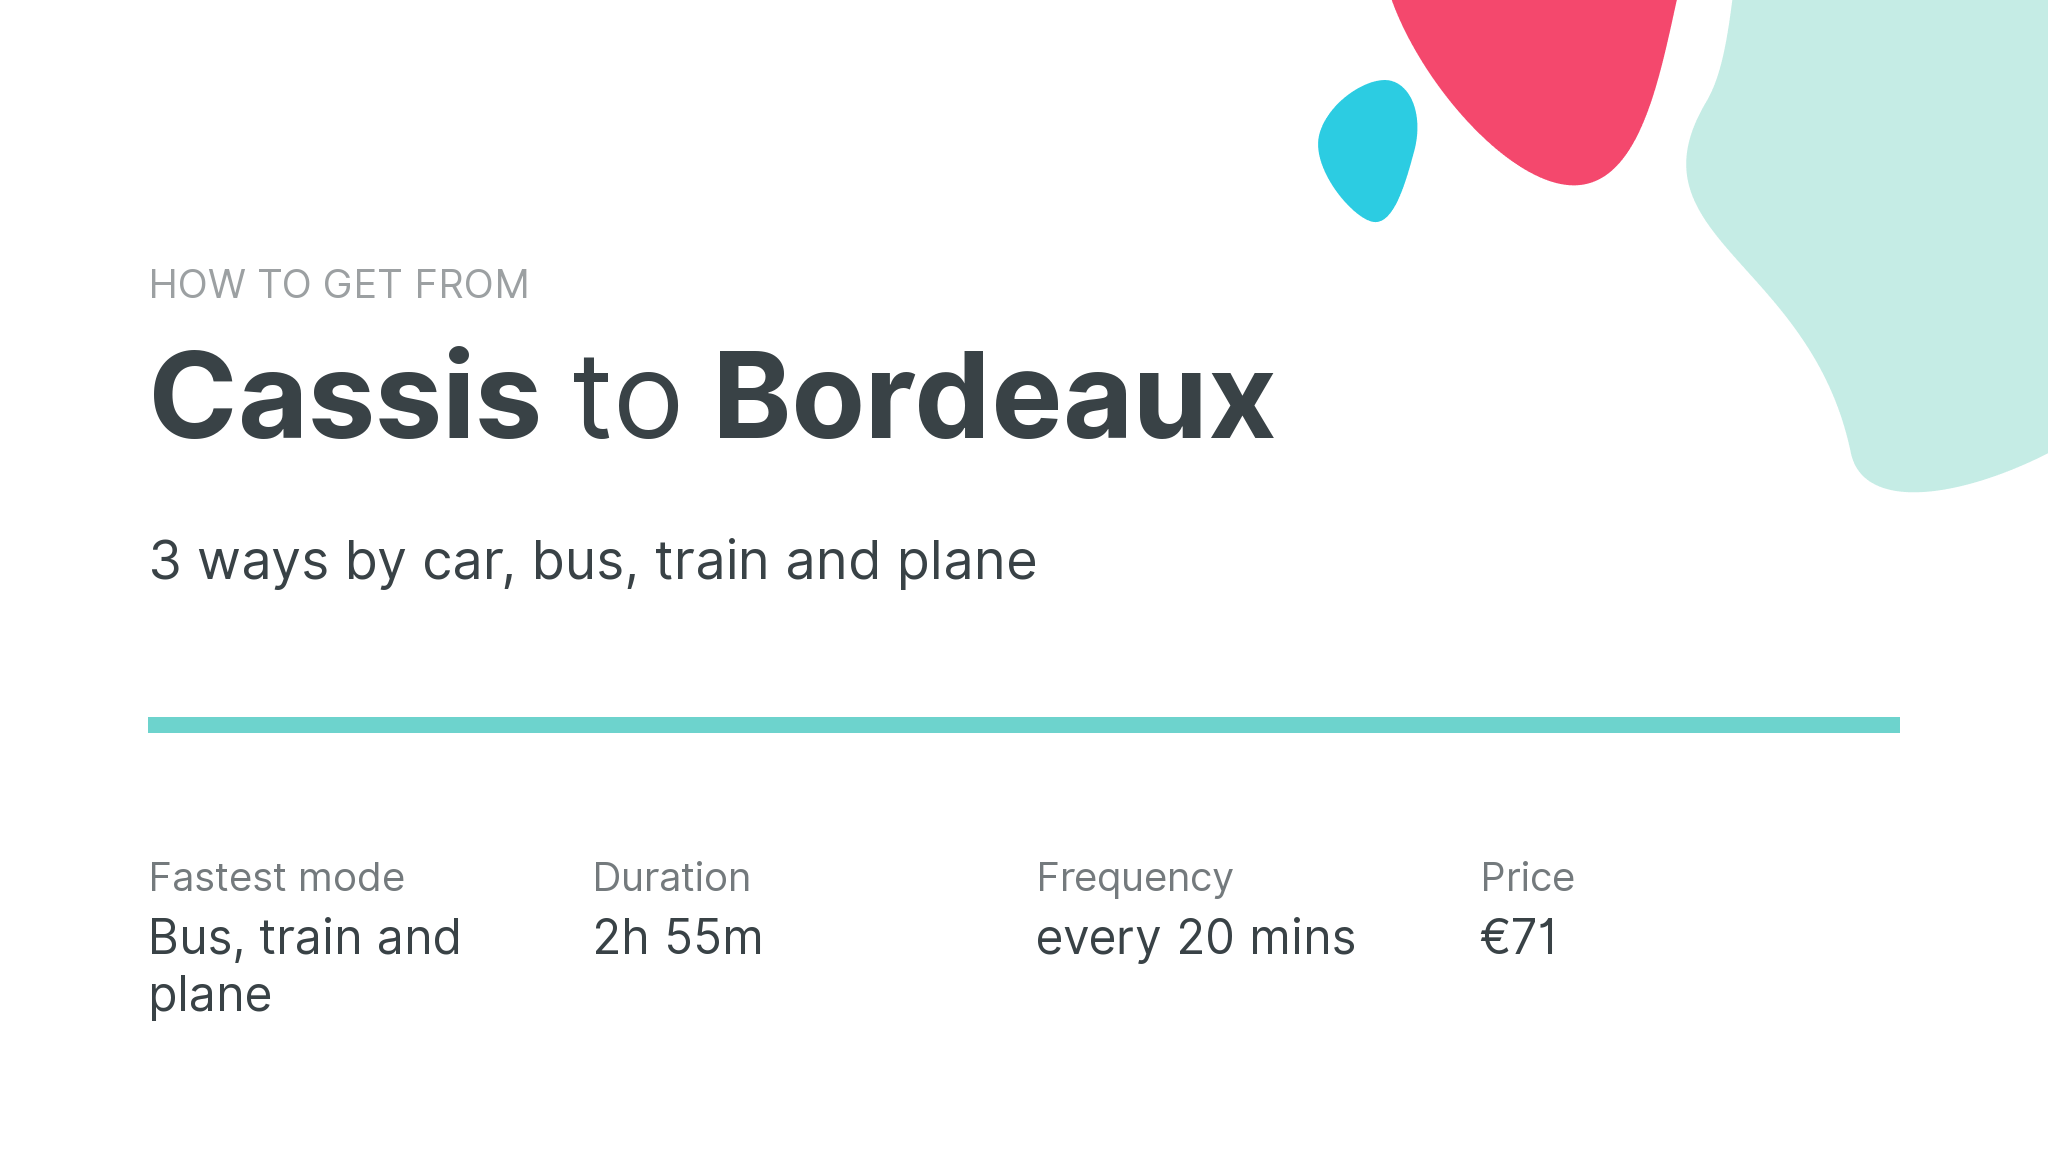 How do I get from Cassis to Bordeaux